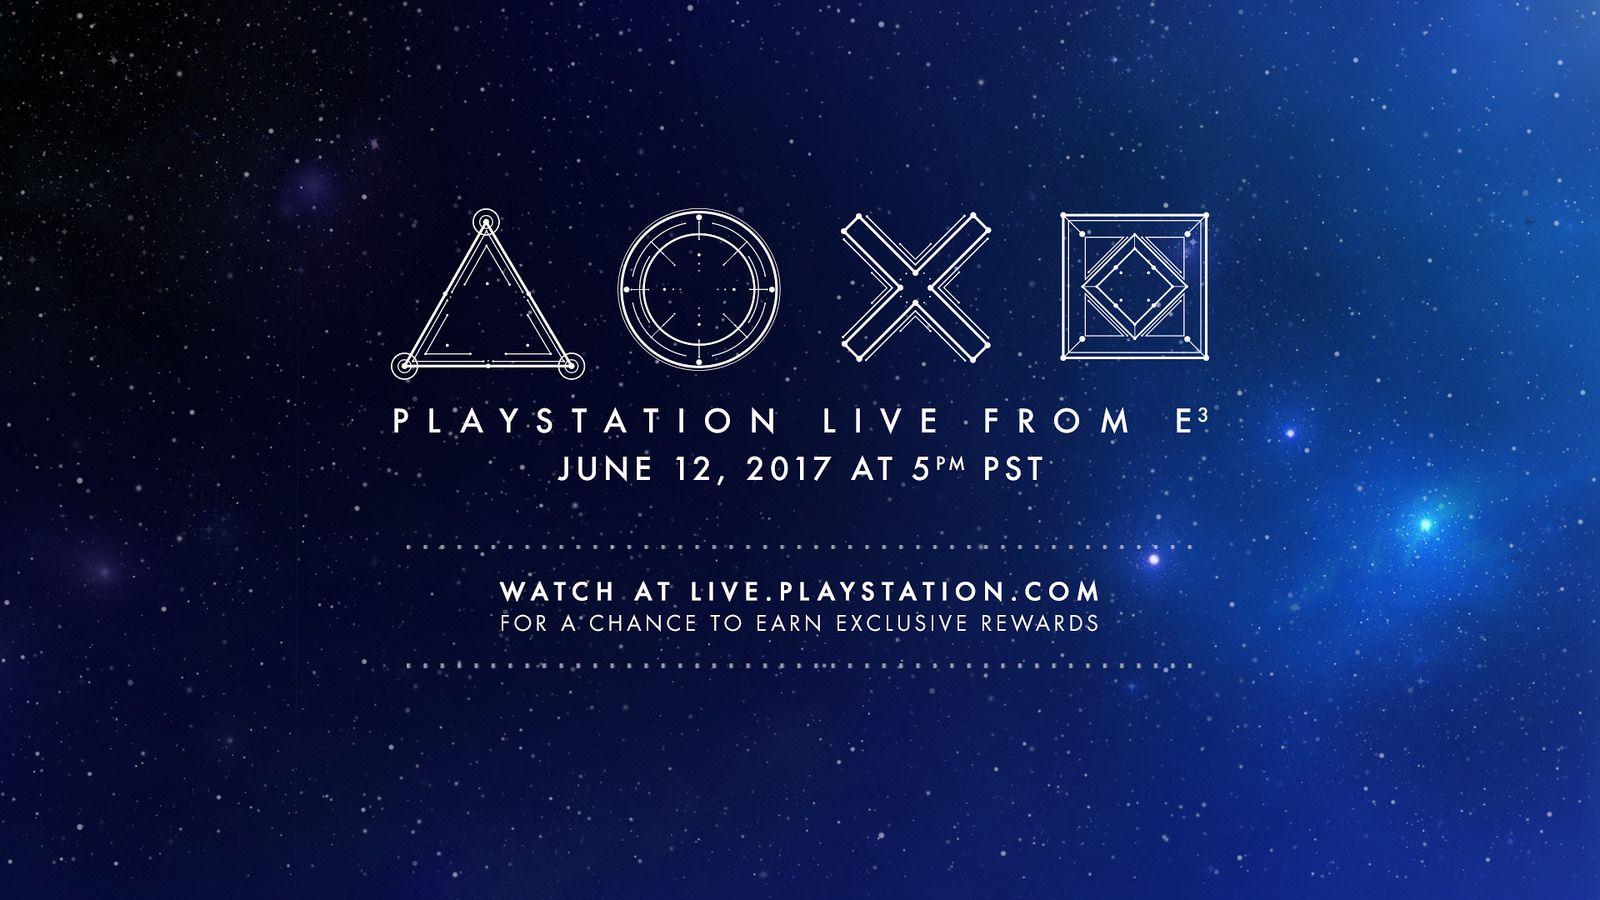 PlayStation Live From E3 2017 Streams Monday: Watch Live, Earn